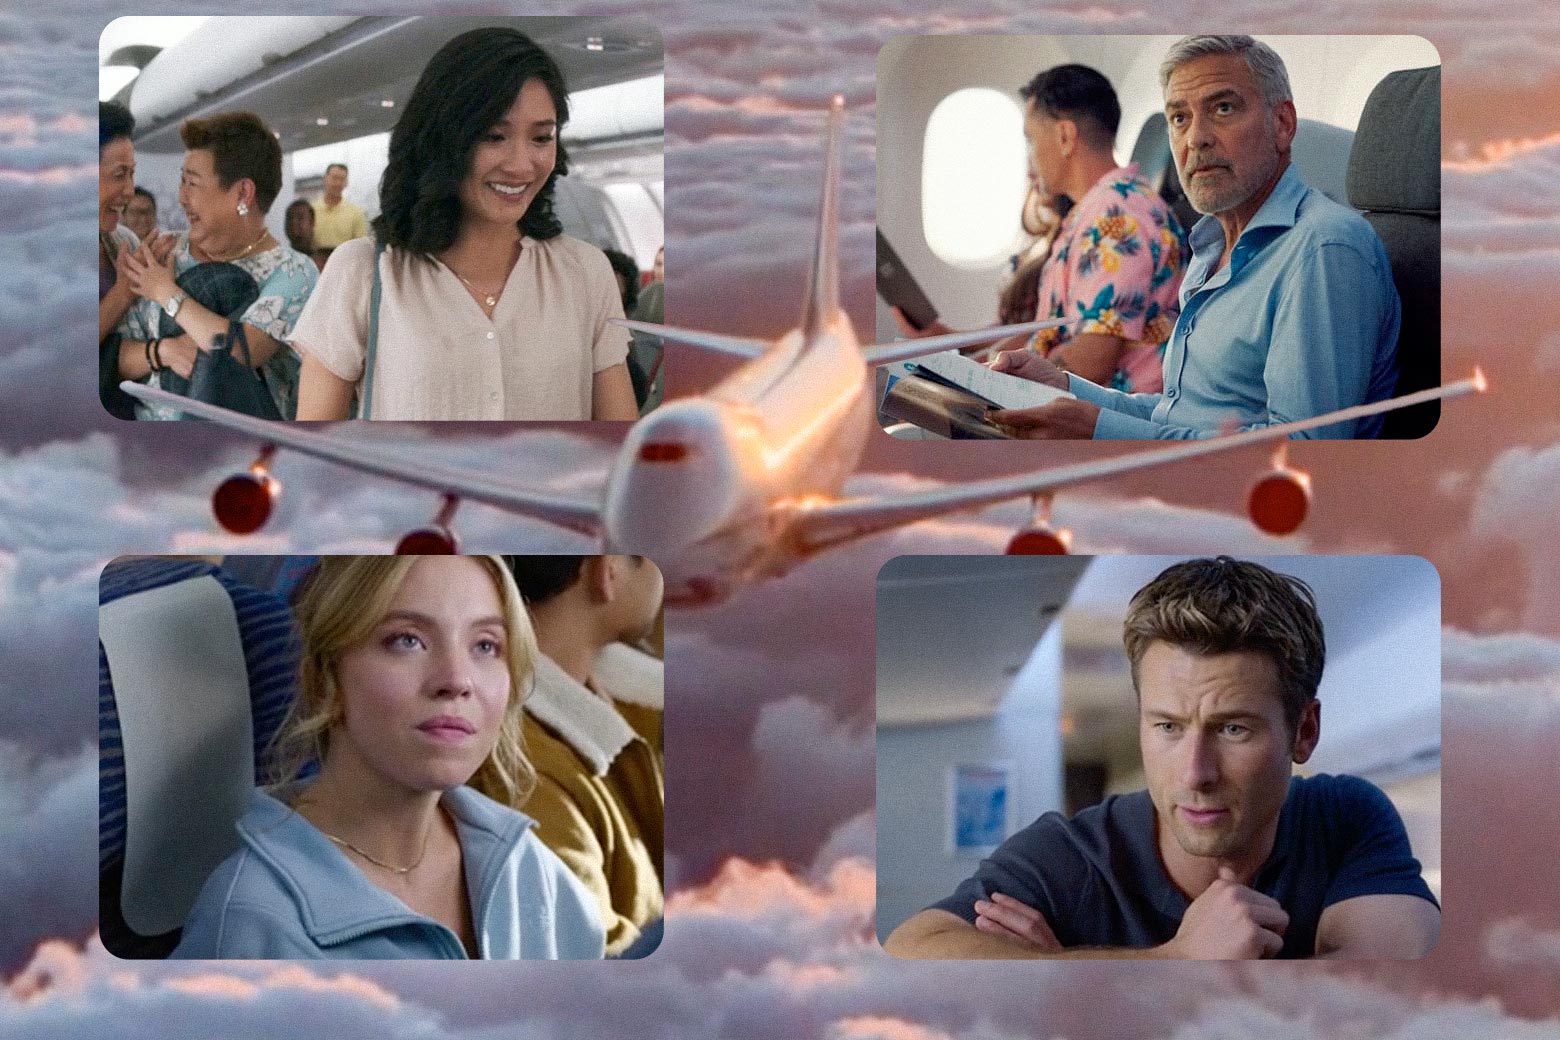 Collage of the movies Crazy Rich Asians, Ticket to Paradise, and Anyone but You, overlaying a photo of a plane in the sky.